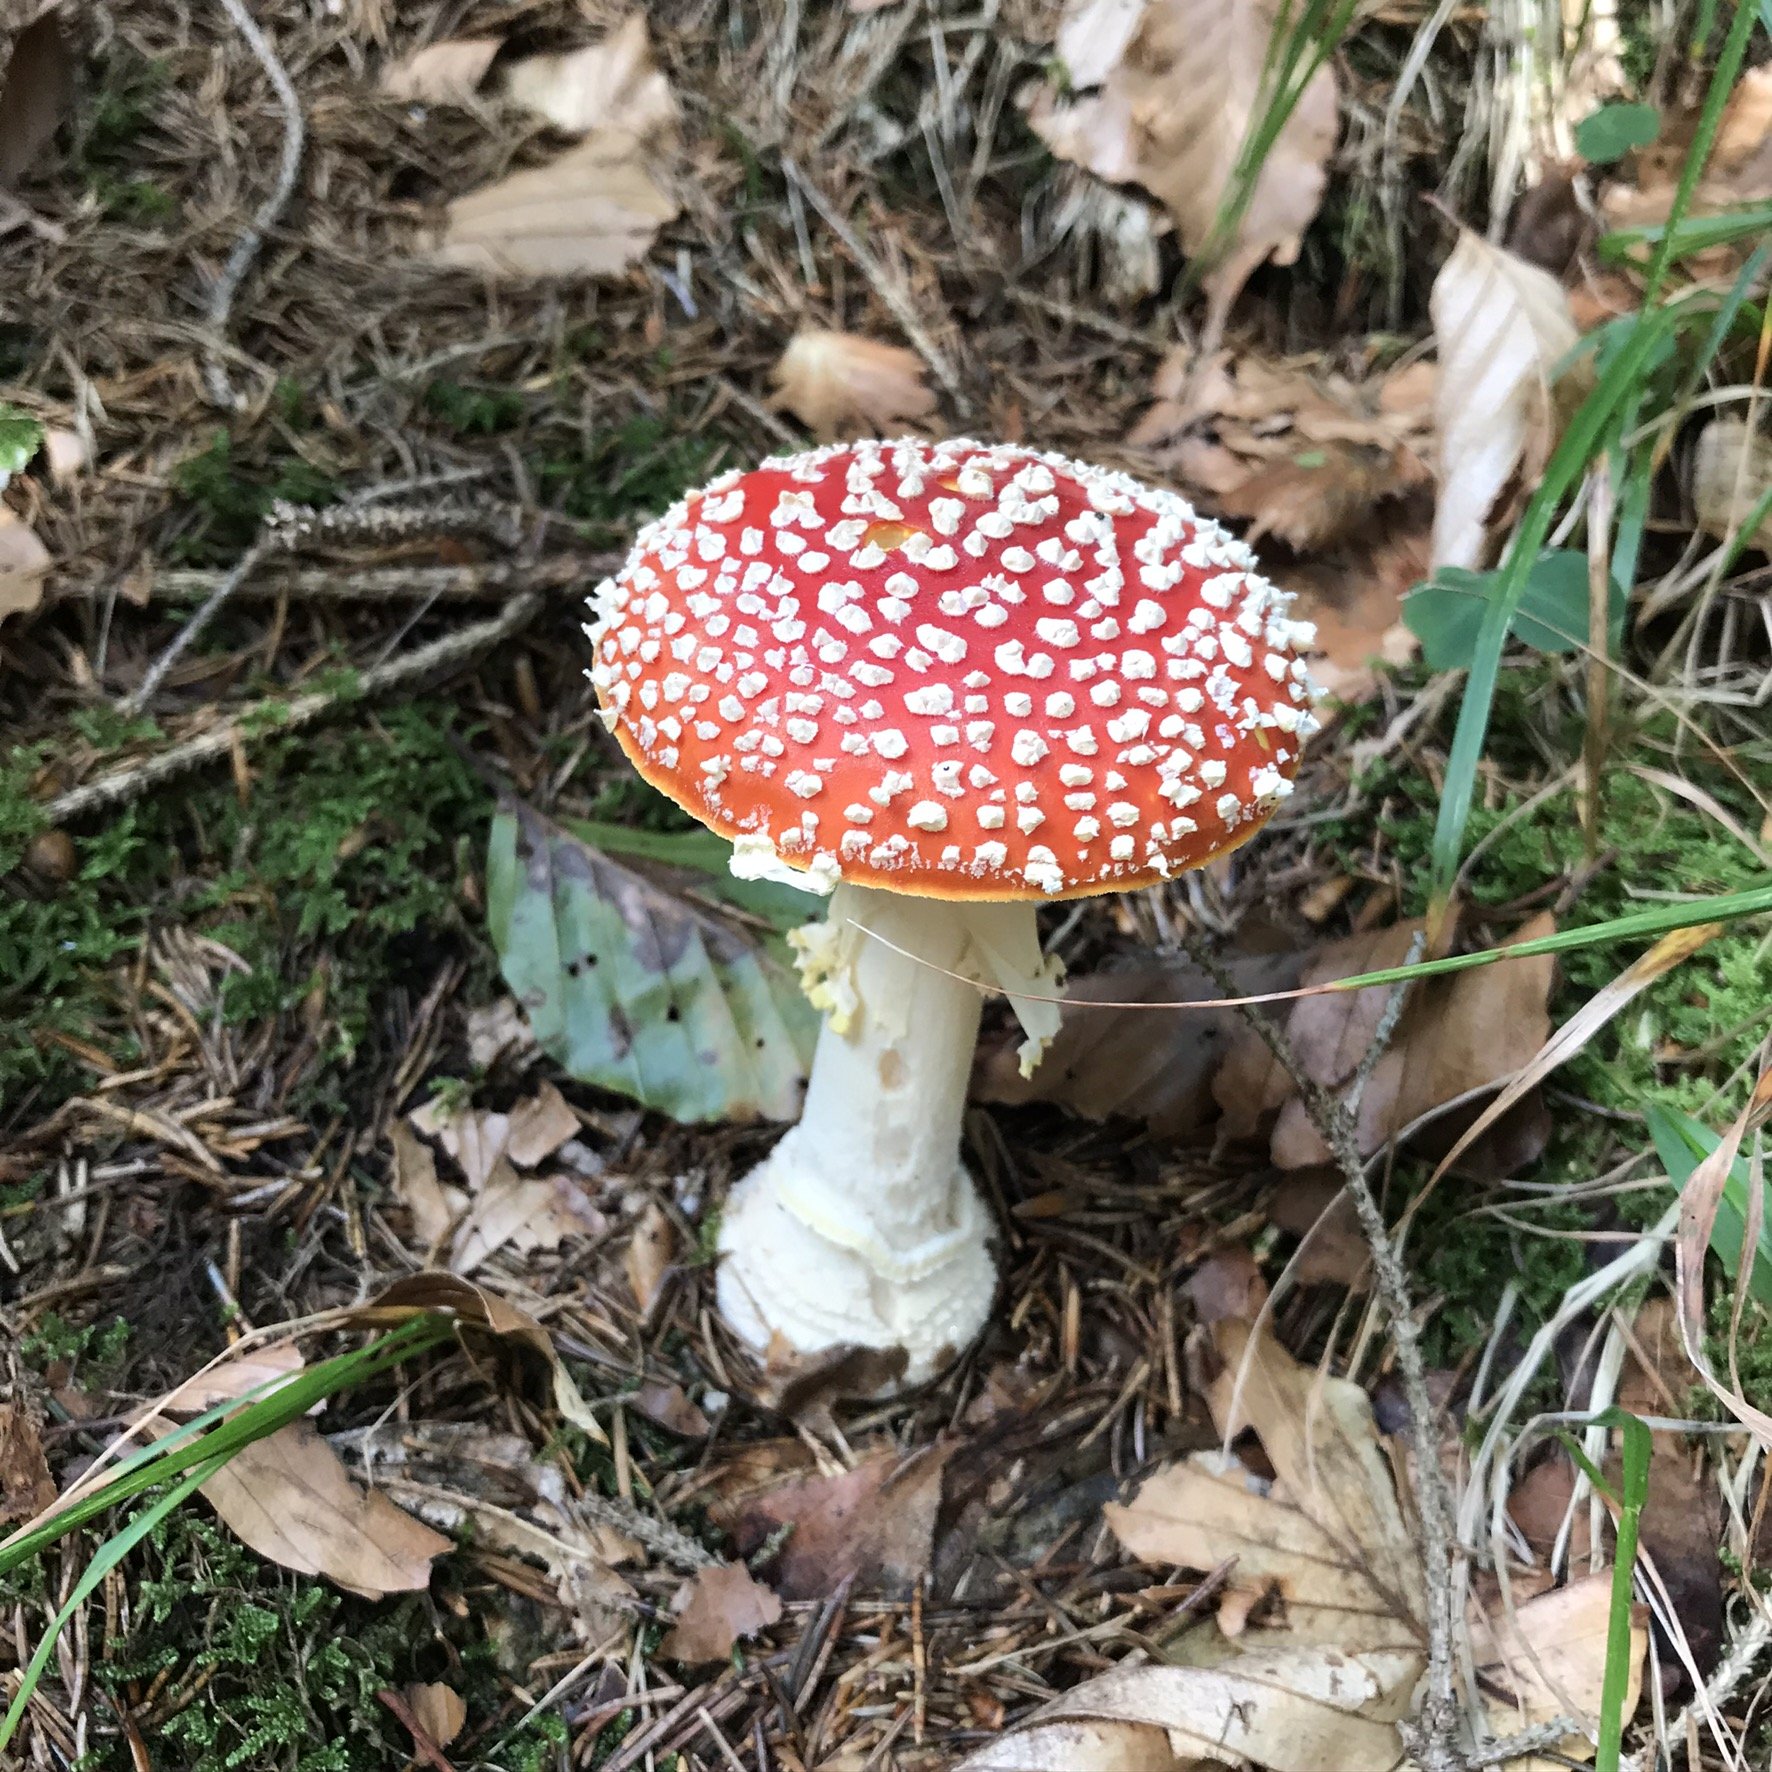  PICTURED: A mature amanita muscaria also known as the Alice in Wonderland mushroom, and a good hunting sign that porcini may be found nearby. PC: Andrew Corbley © 